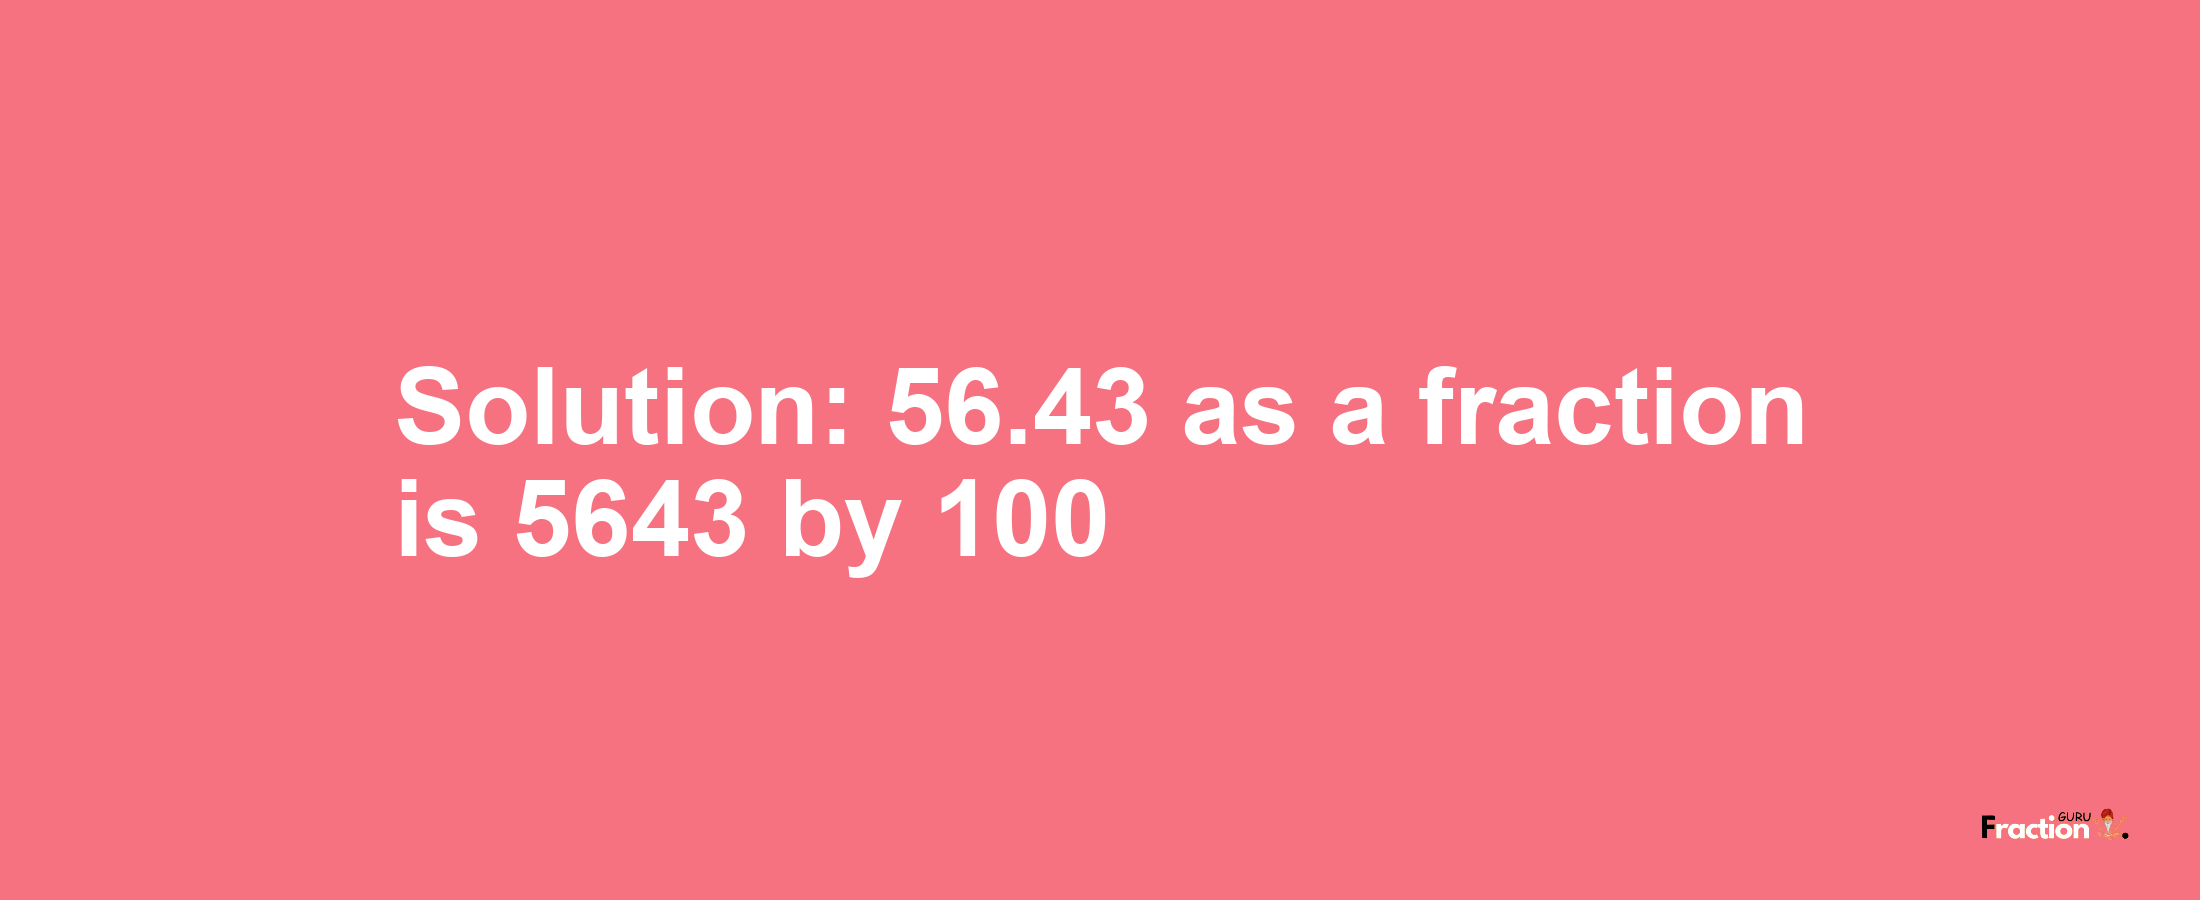 Solution:56.43 as a fraction is 5643/100